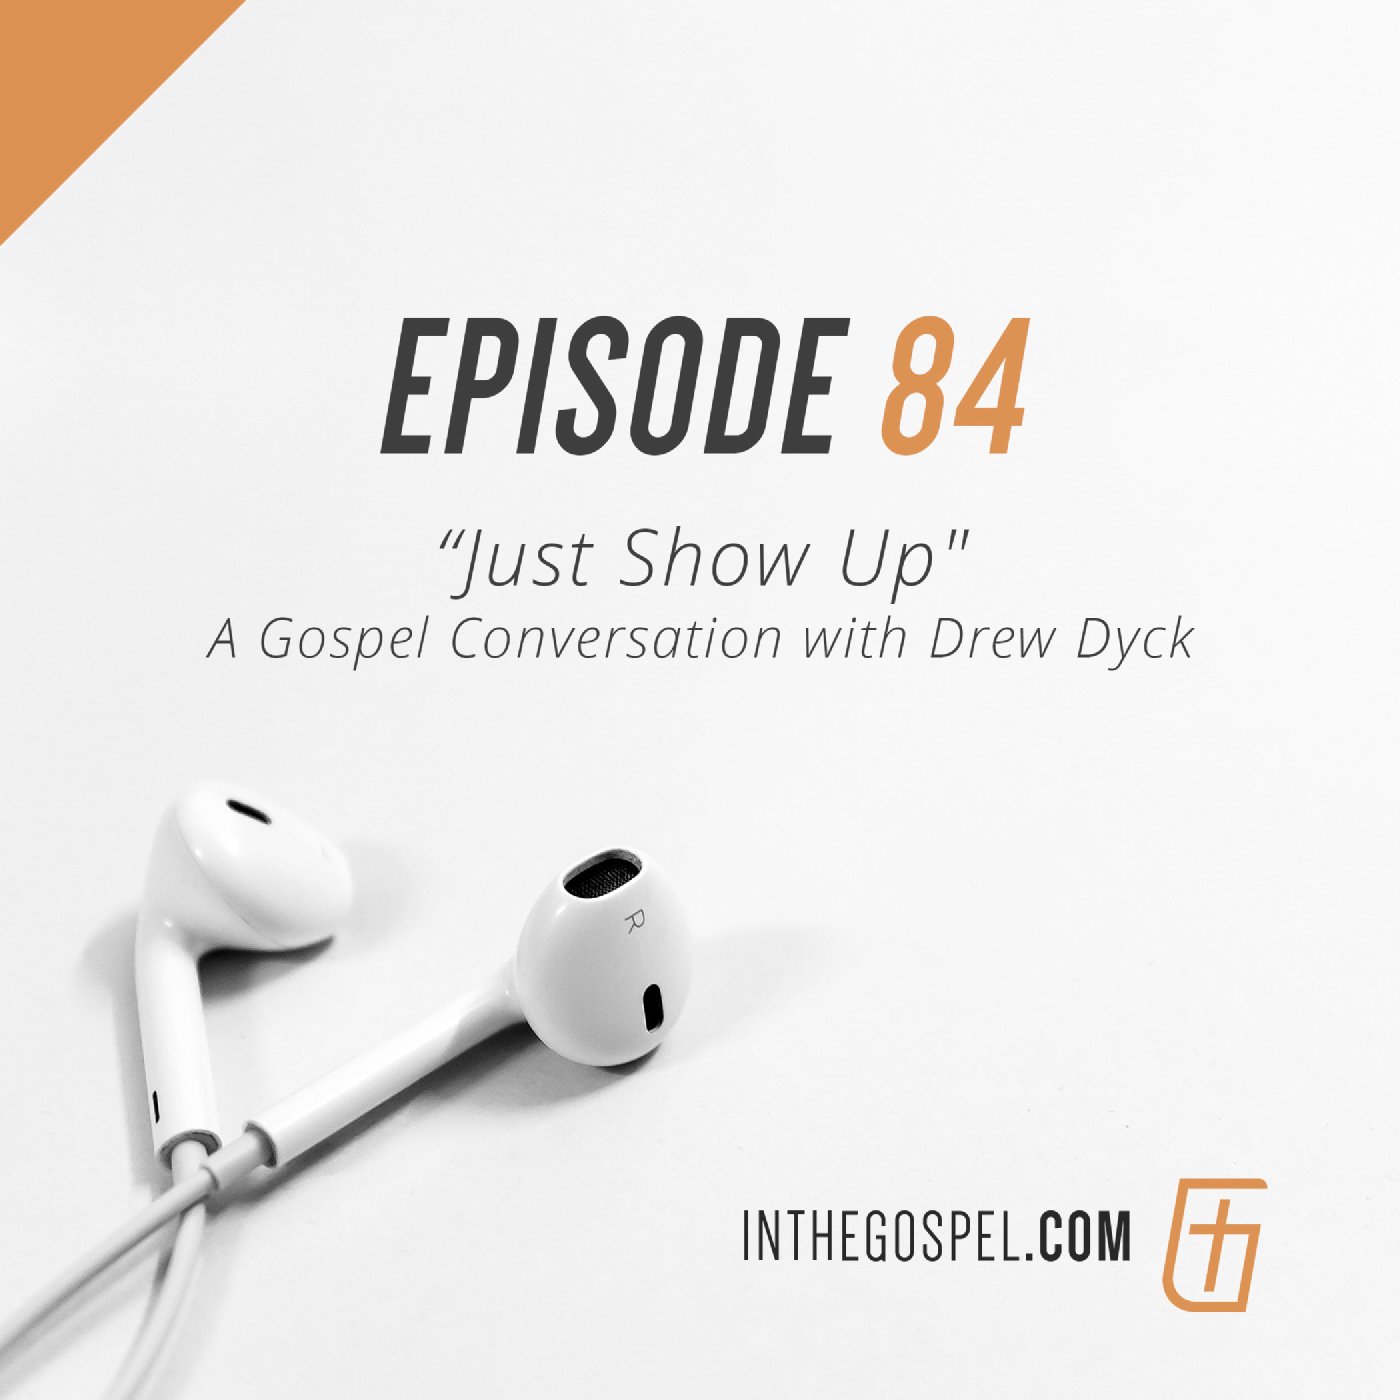 Episode 84: ”Just Show Up” A Gospel Conversation with Drew Dyck